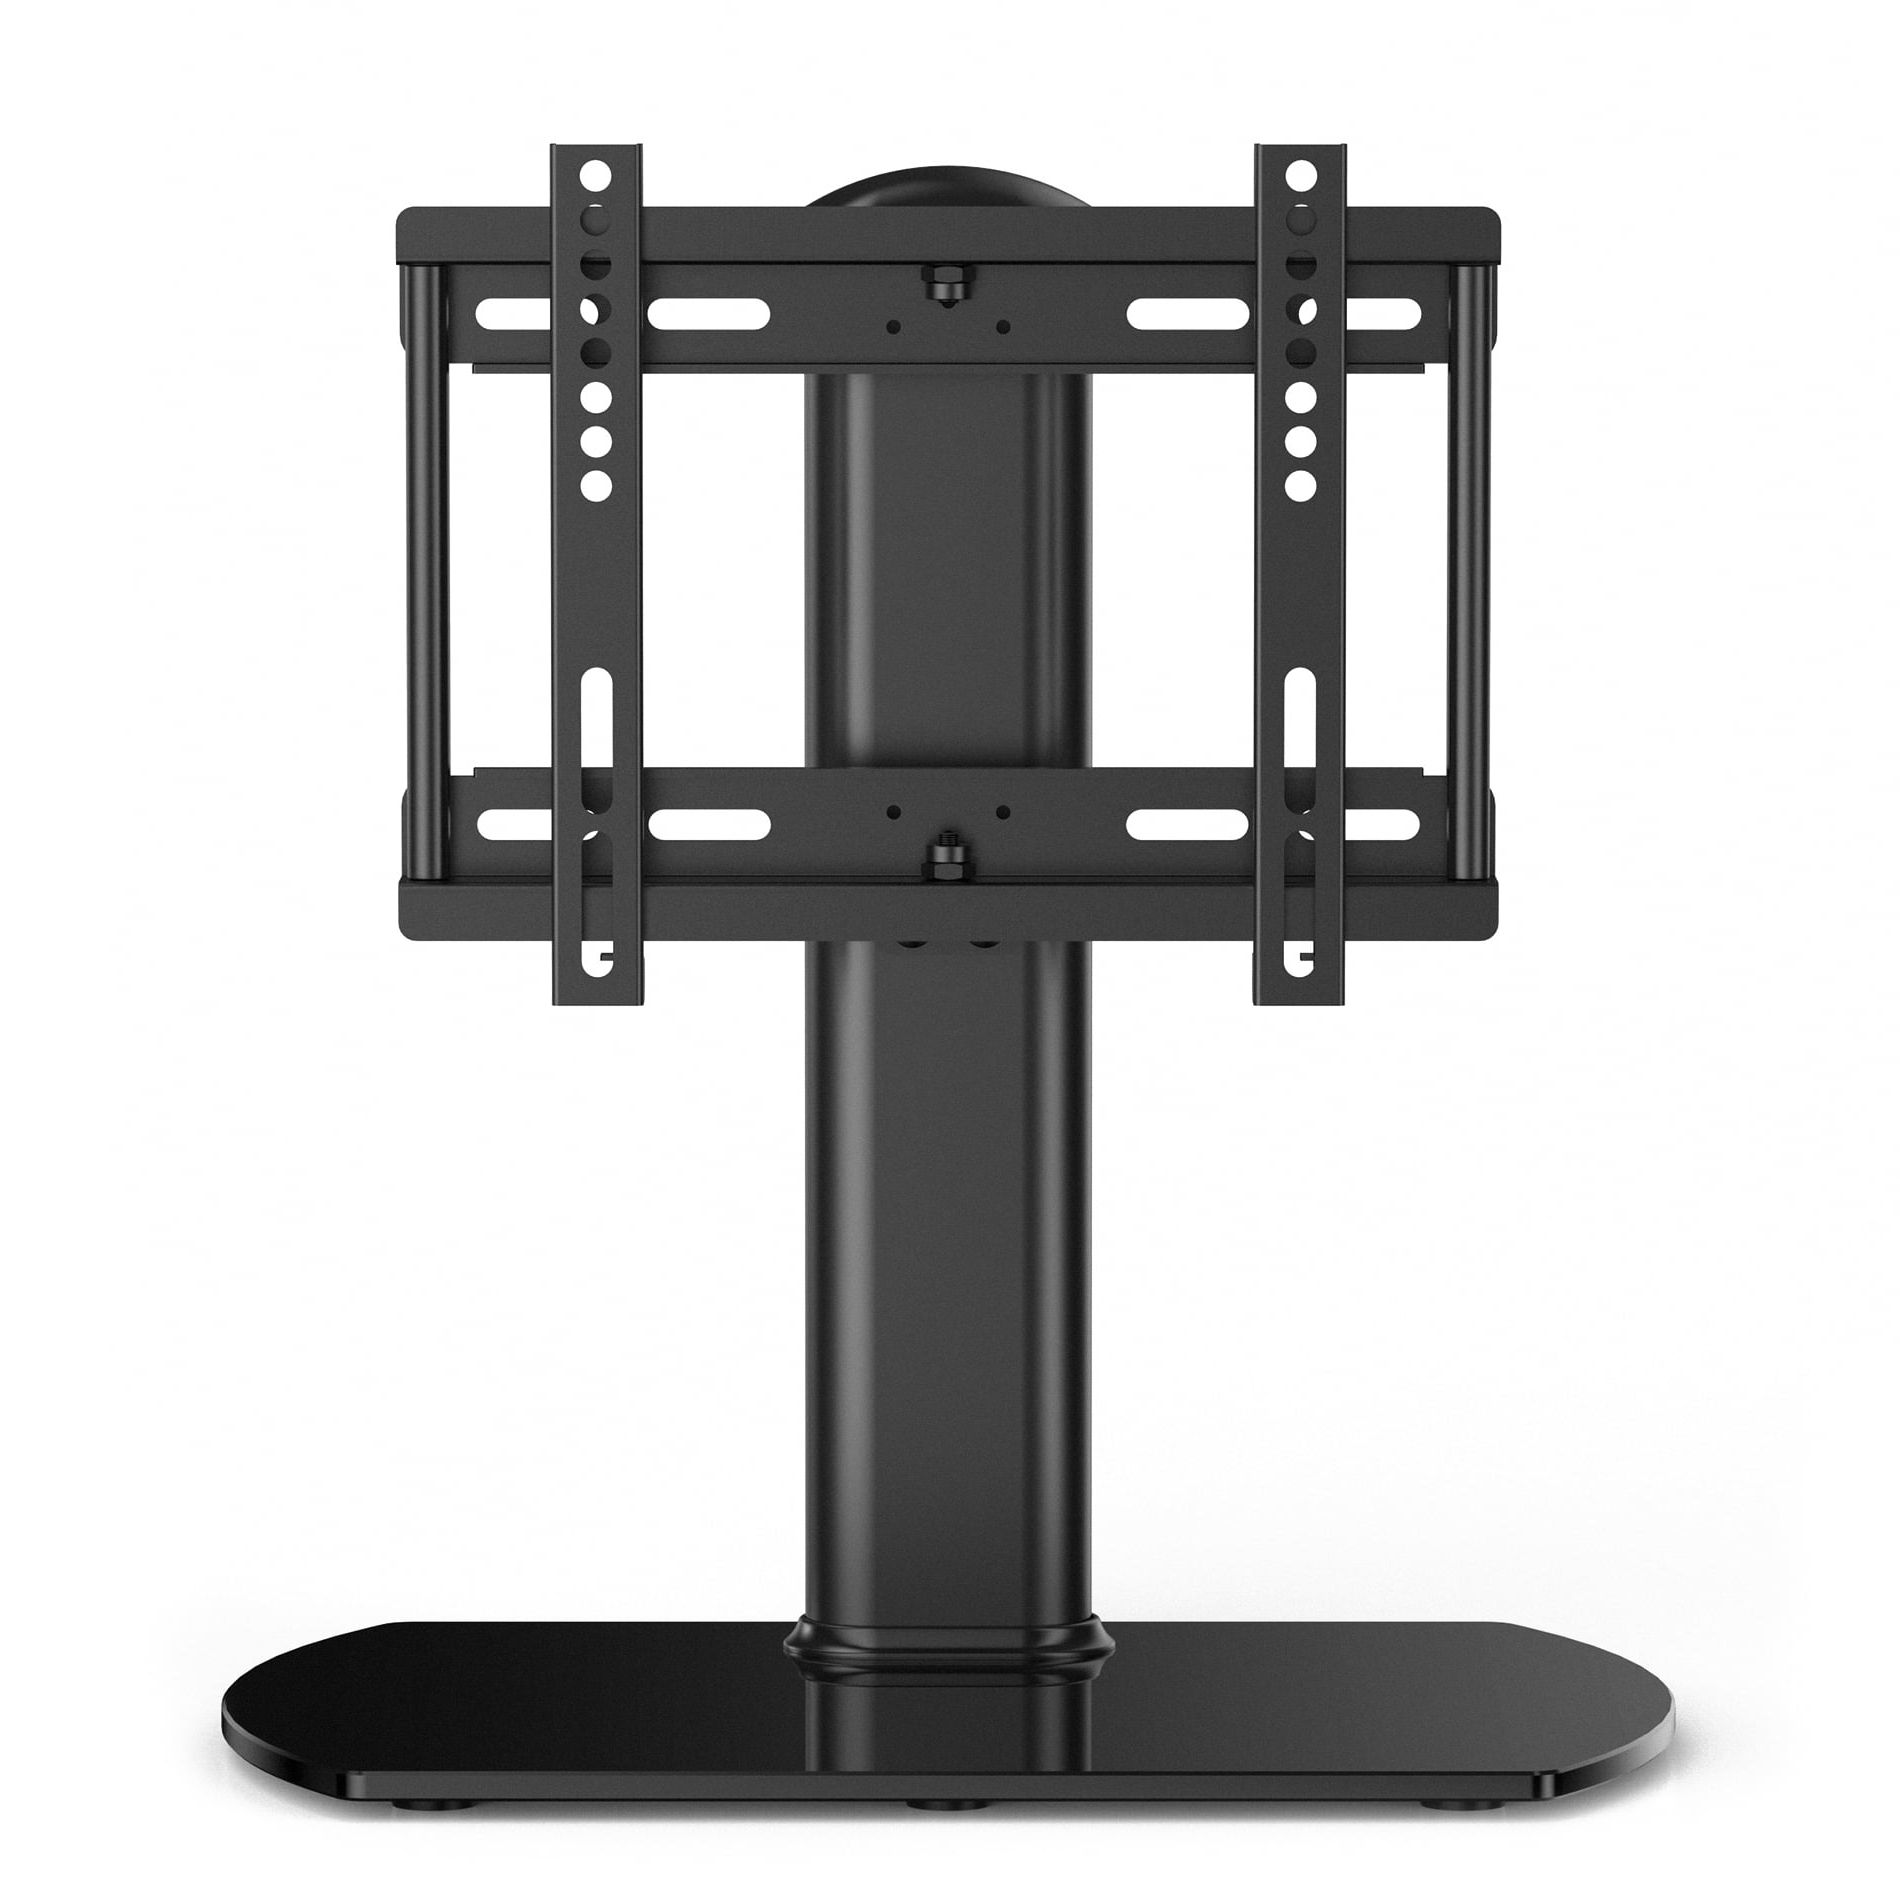 2020 Universal Tabletop Tv Stands Intended For Fitueyes Universal Swivel Tabletop Tv Stand Base With Mount For 27 To (View 8 of 15)